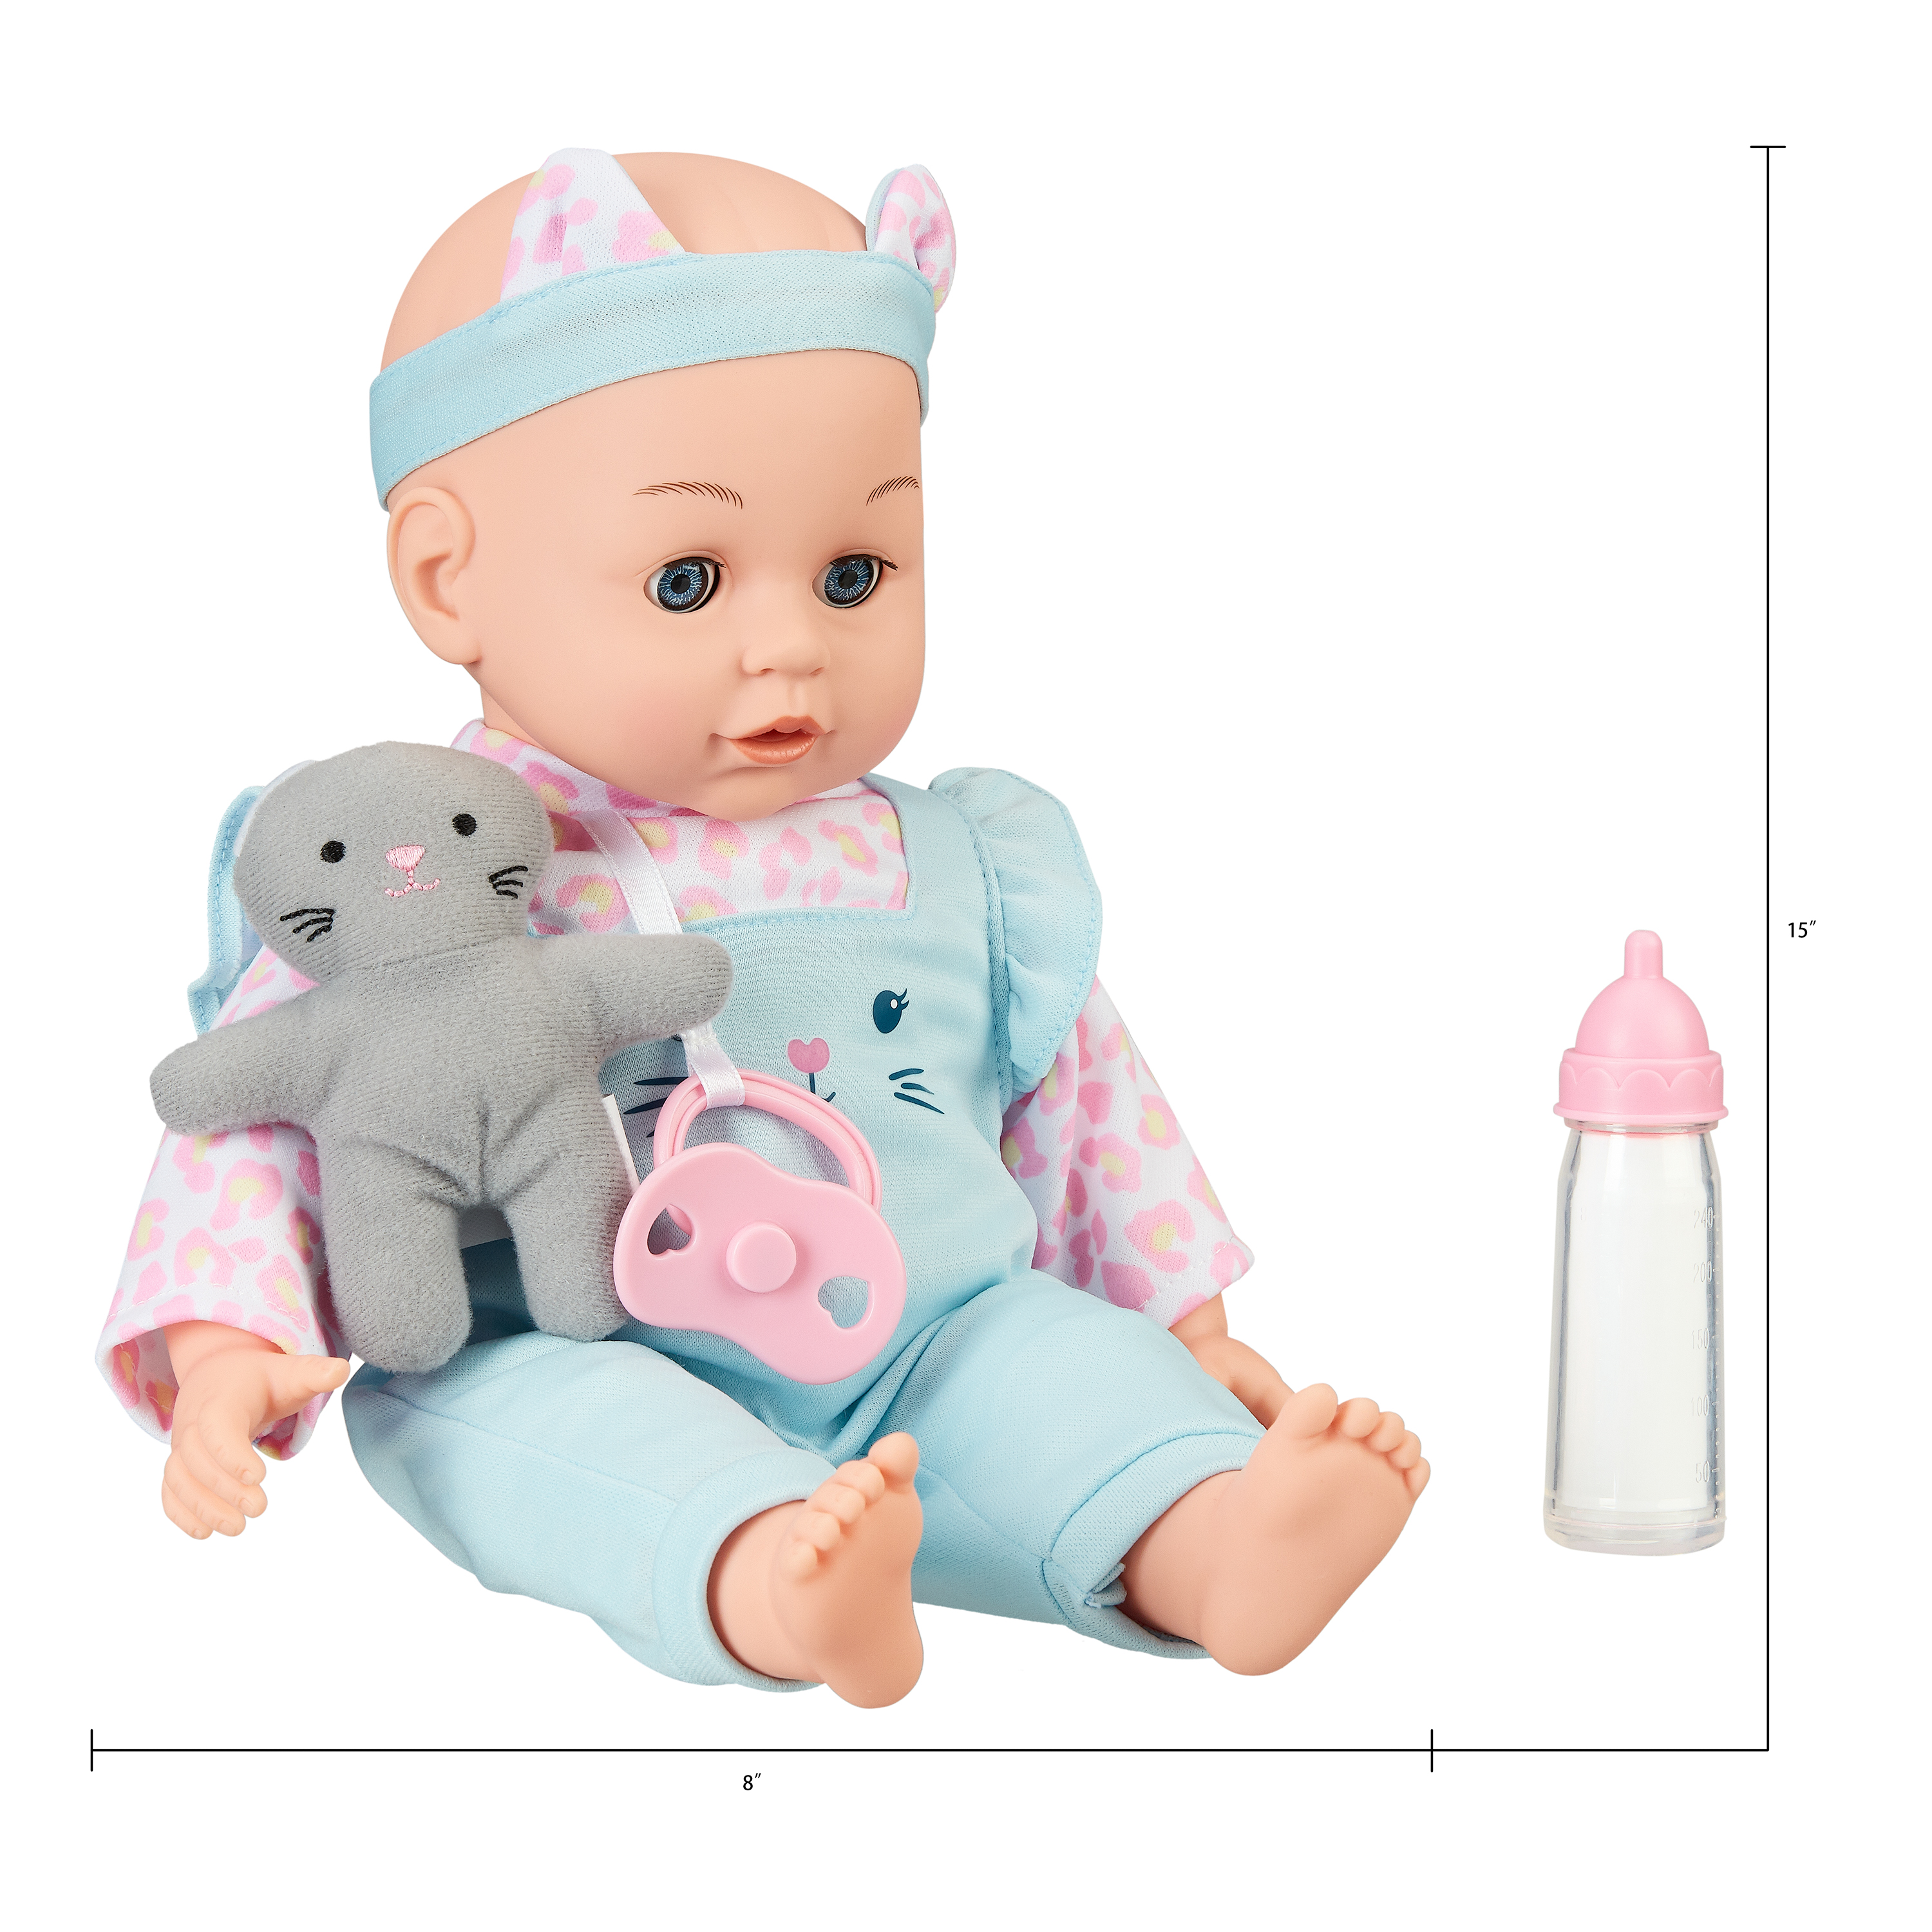 My Sweet Love Sweet Baby Doll Toy Set, 4 Pieces - image 5 of 5